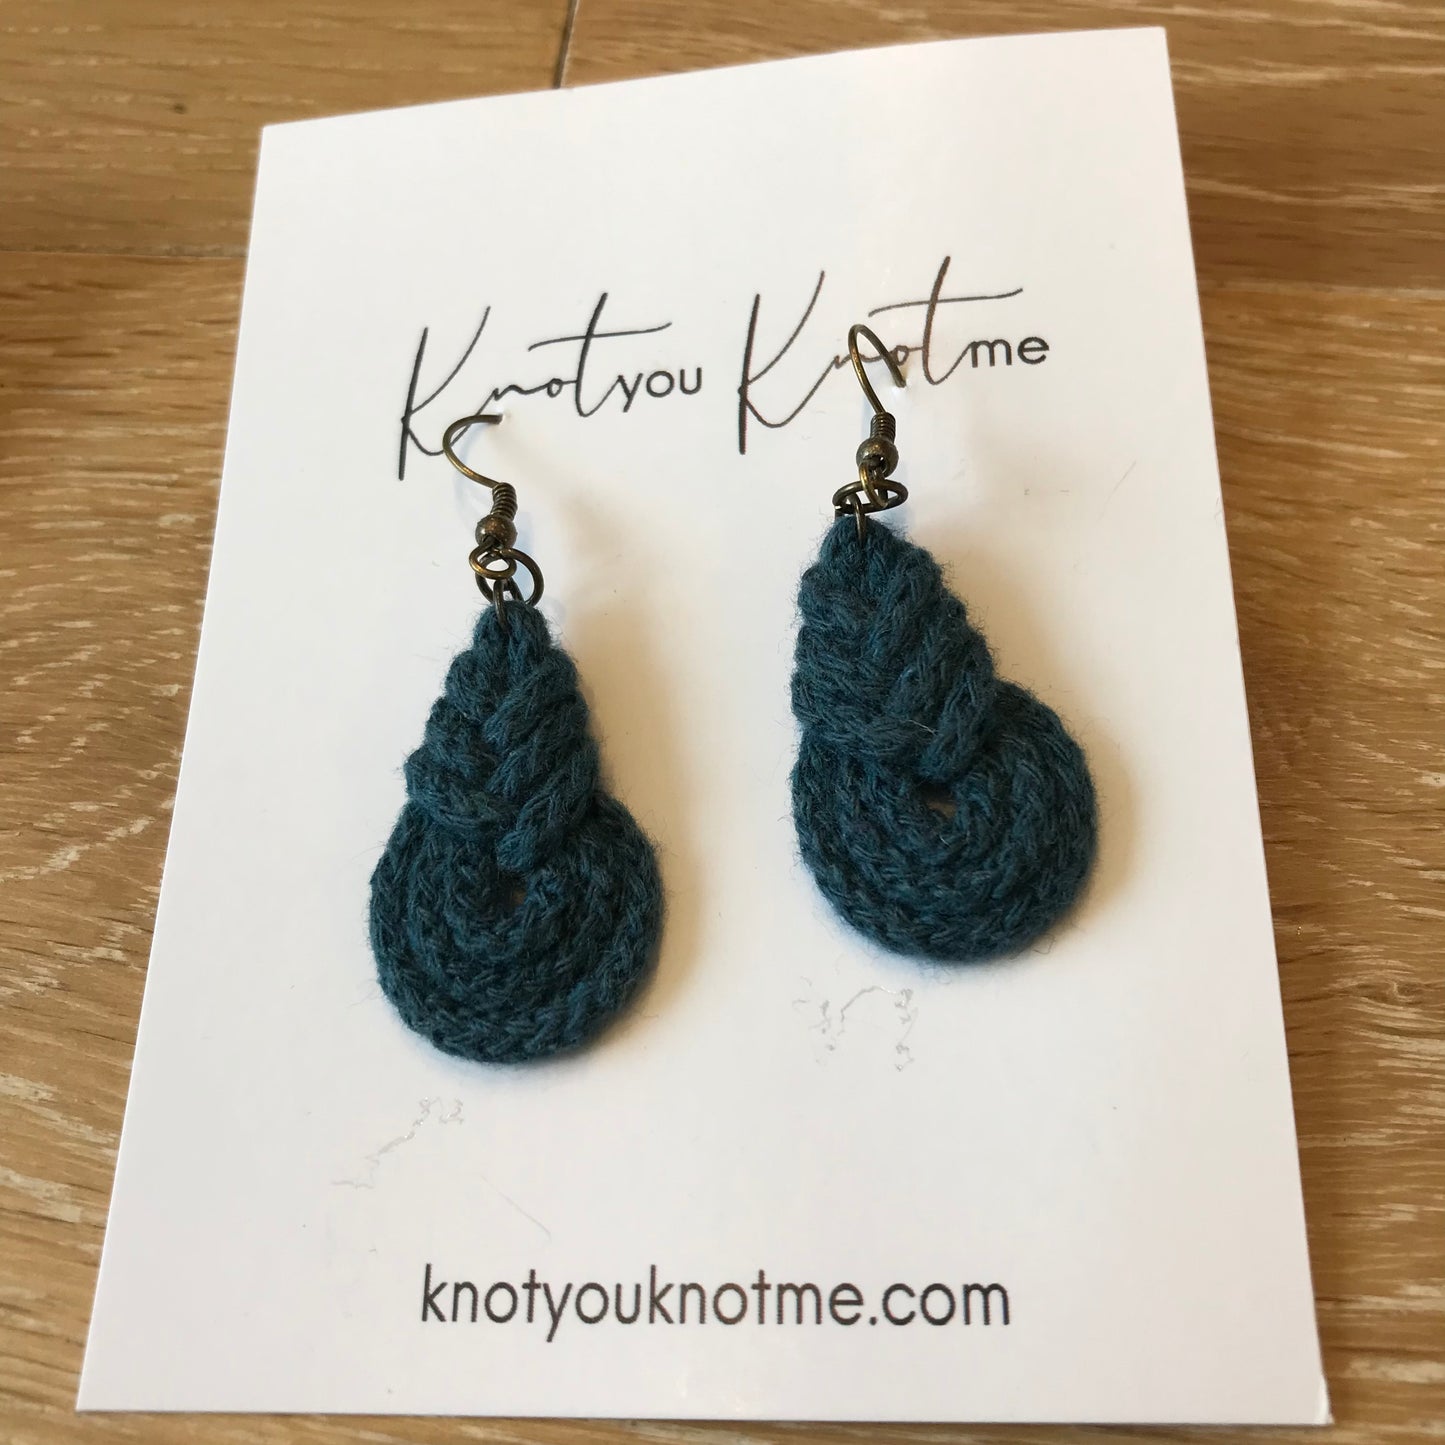 Pippa Knotted Fiber Earrings